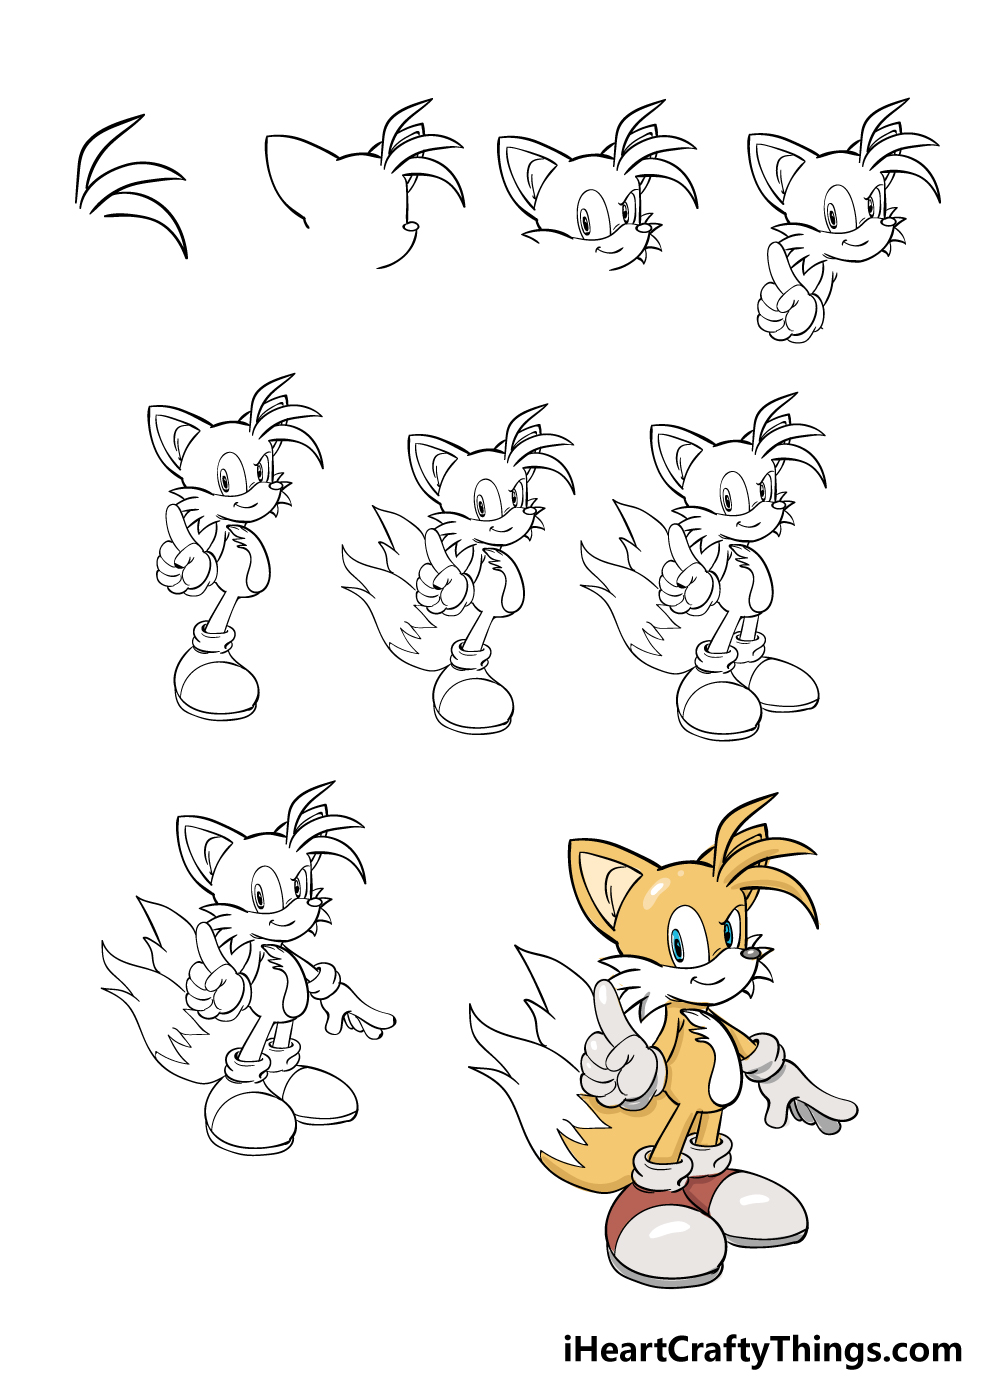 how to draw tails in 9 steps